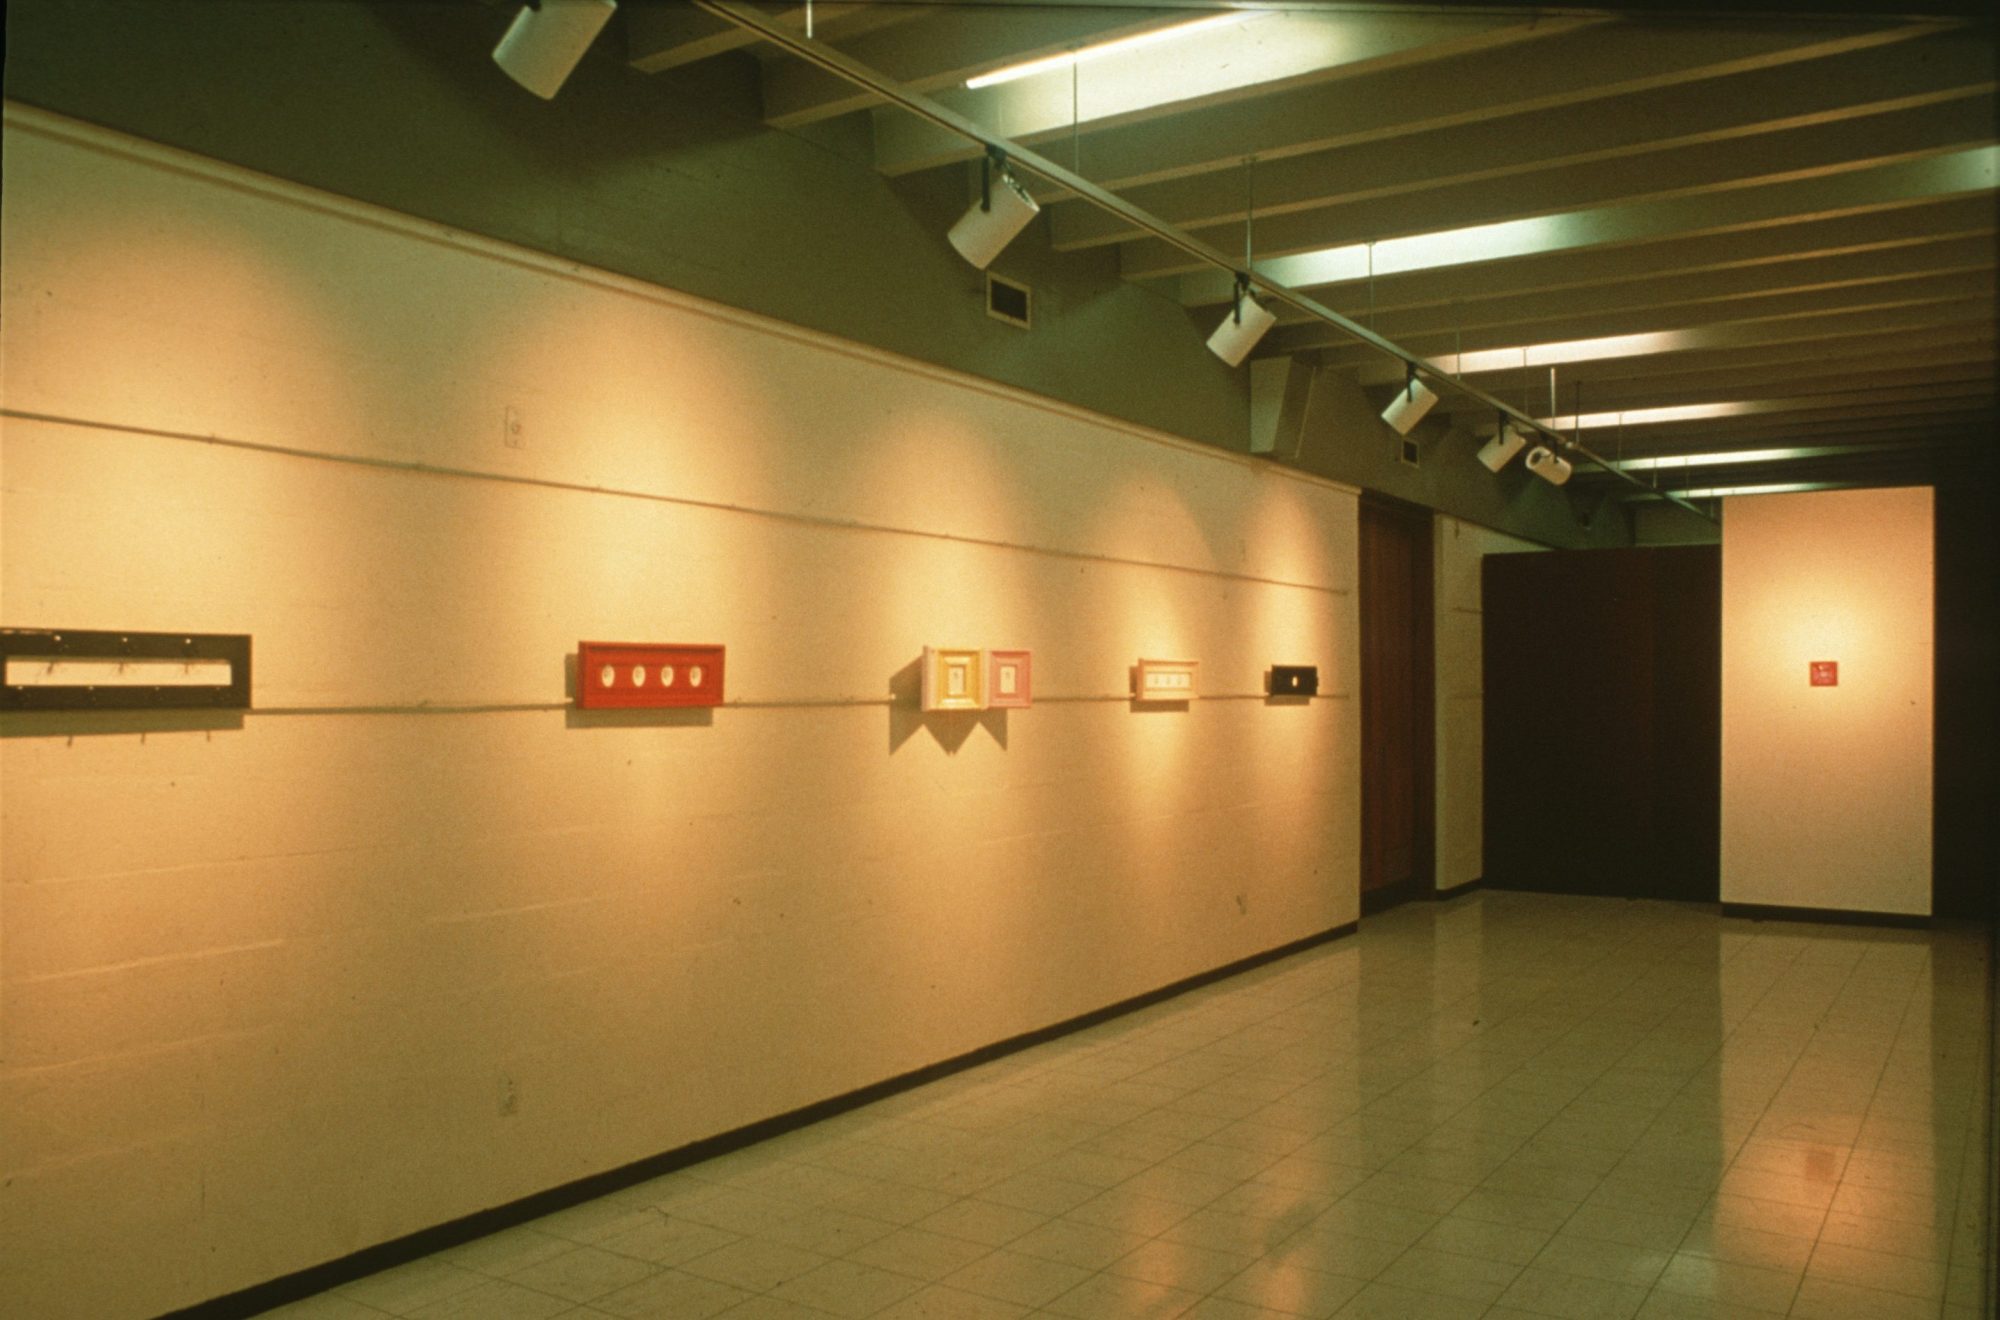 <p>Grant Lingard, <em>Homosexual: Beyond 4 Straight Sides</em> (August &ndash; 4 September 1988), CSA Gallery, Christchurch (installation detail). Image courtesy of the Grant Lingard Archive&nbsp;</p>